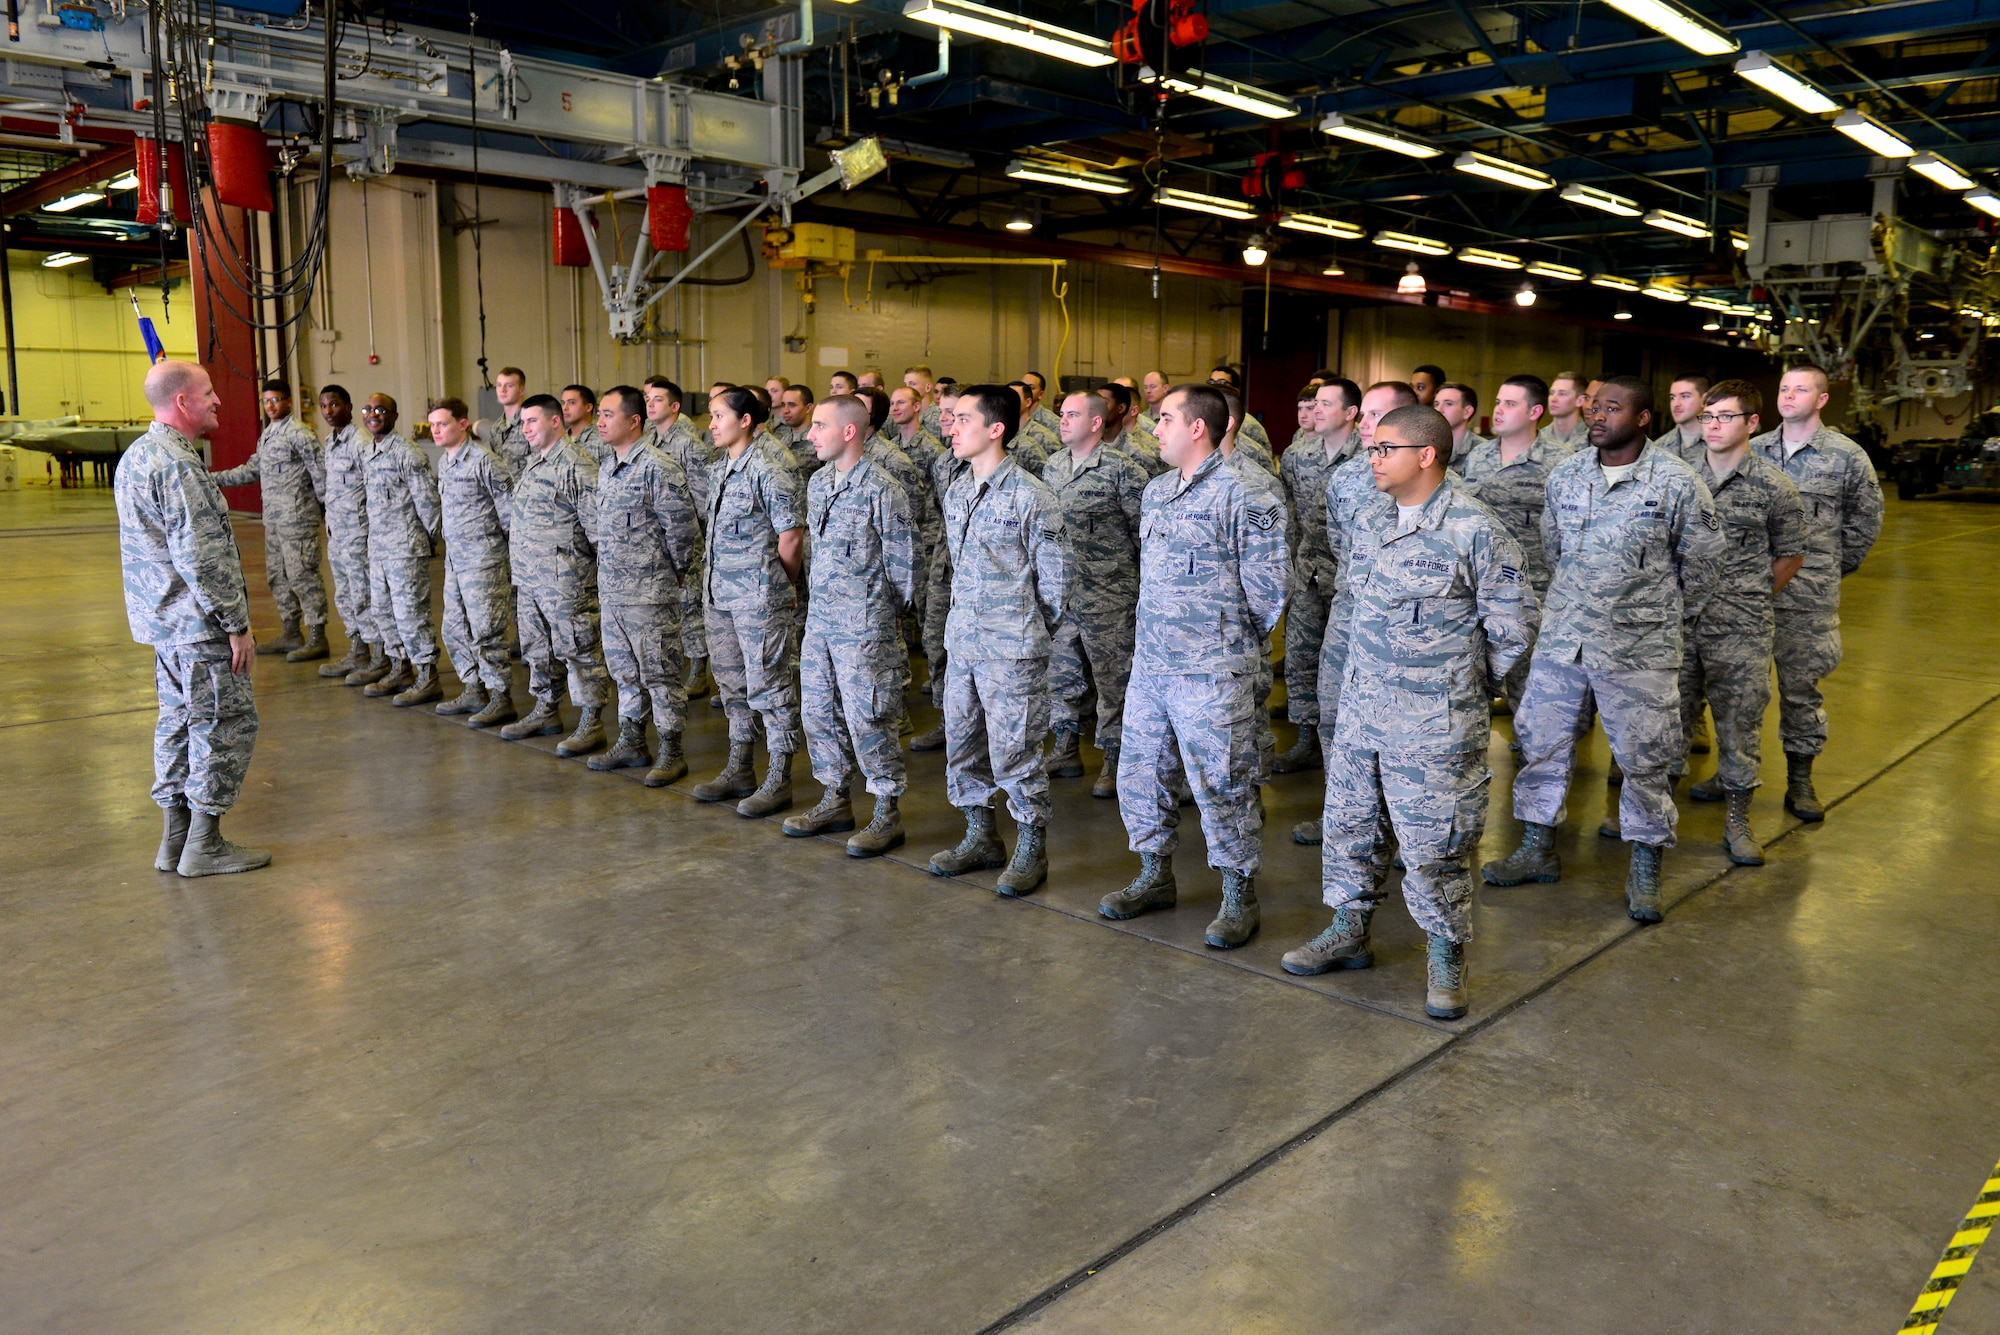 Lt. Gen. Stephen Wilson, commander of Air Force Global Strike Command, visits Airmen with the 2nd Munitions Squadron on Barksdale Air Force Base, La., Dec. 16, 2014. Airmen from the 2nd MUNS provide mission capable missiles and bombs whenever called upon. (U.S. Air Force photo/Airman 1st Class Mozer O. Da Cunha) 